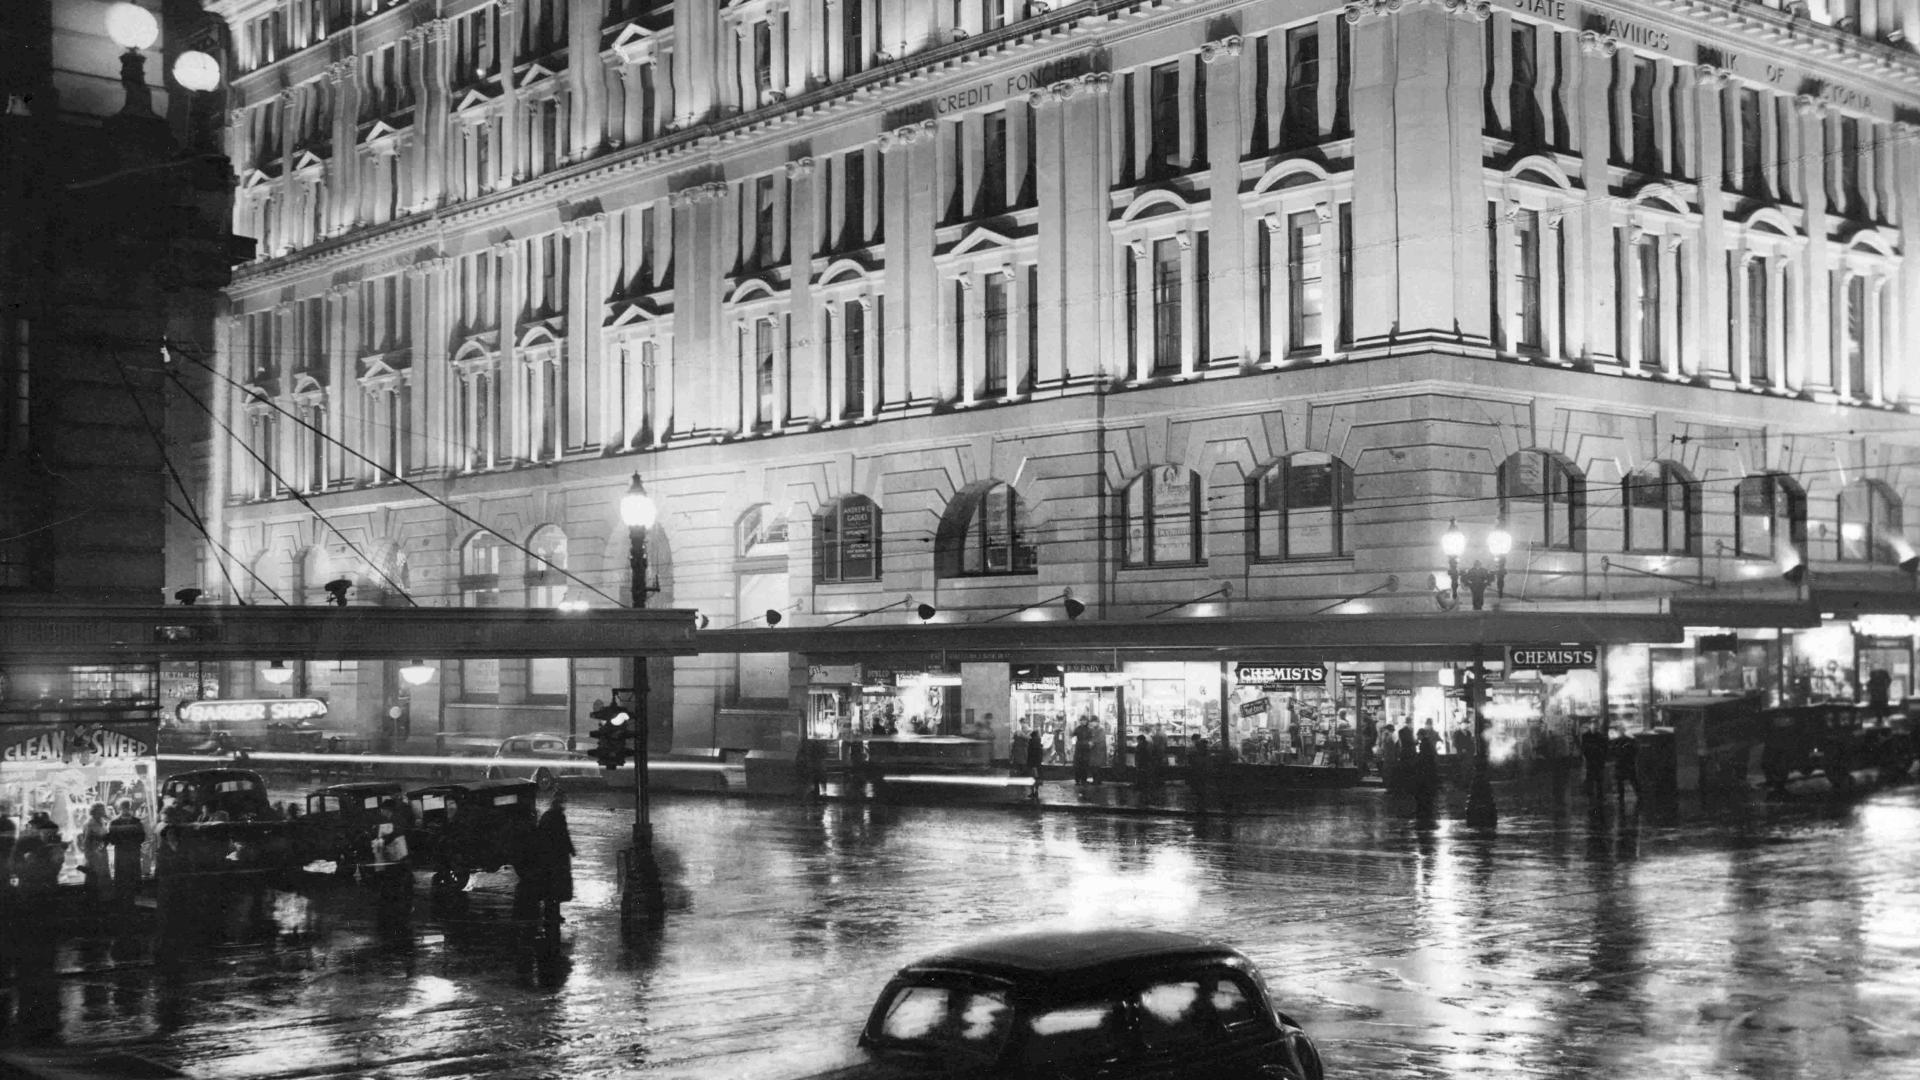 Black and white photograph of a Melbourne city street scene at night, circa 1940